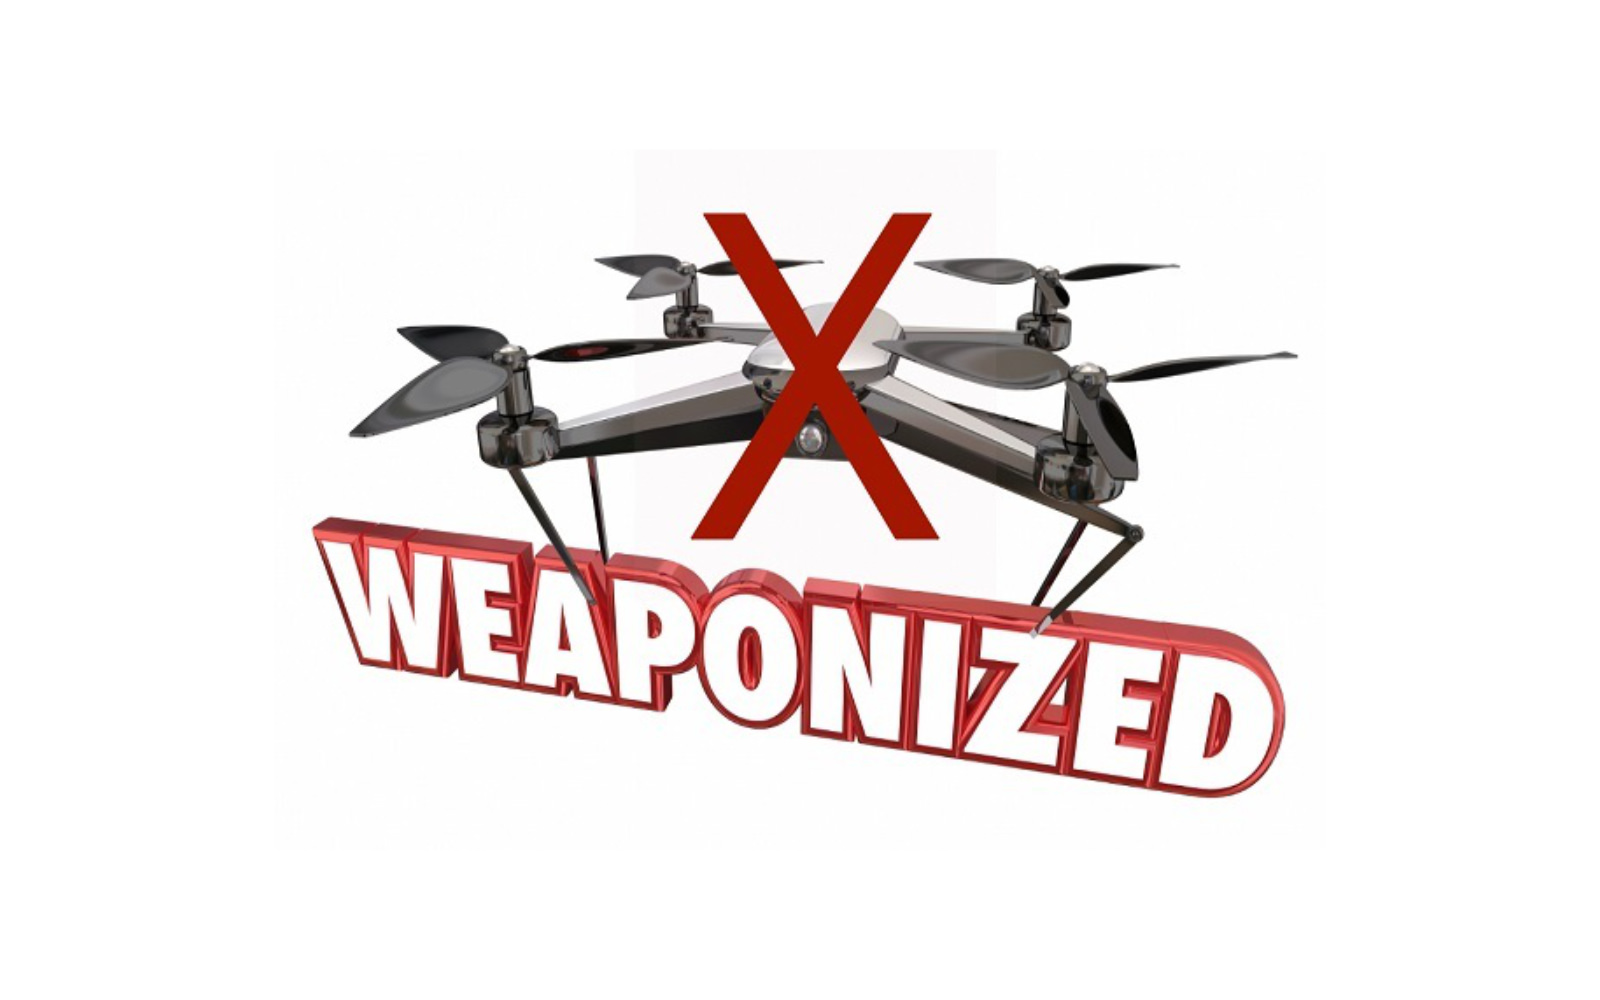 Do not attach weapons to your drone, FAA warns